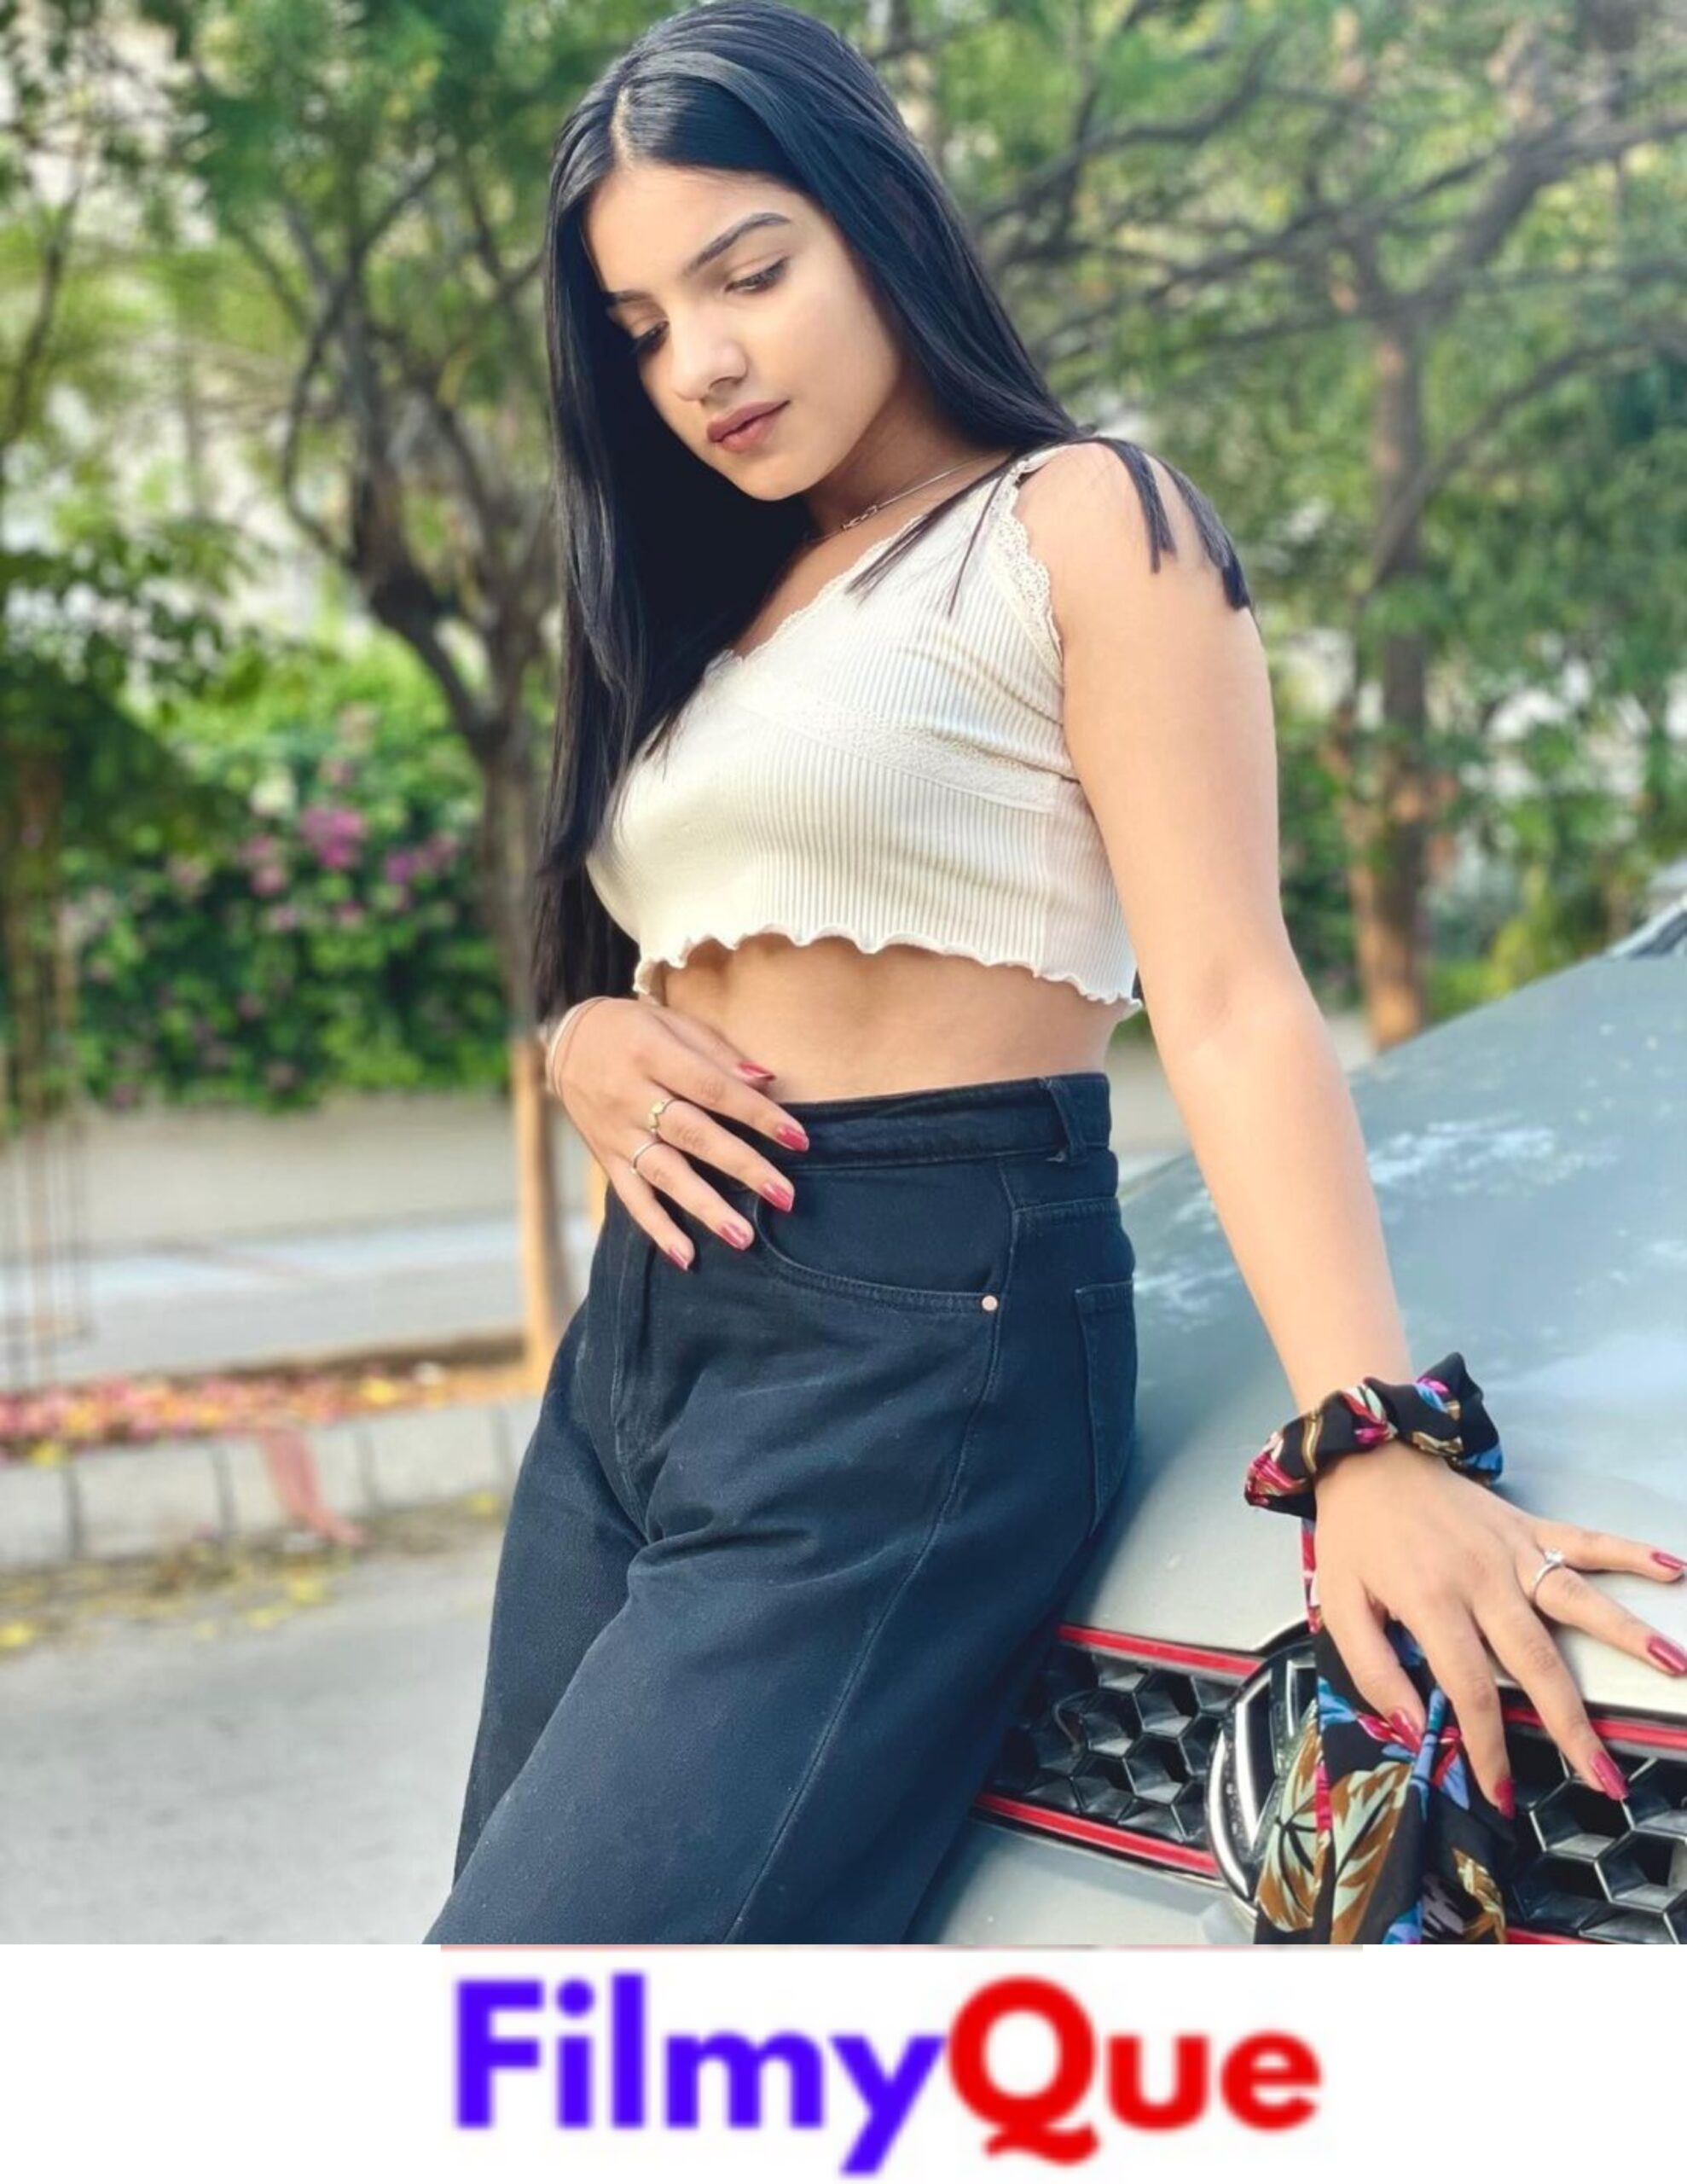 Mehak Gill Age, Boyfriend, Lifestyle, Net Worth, Biography and More